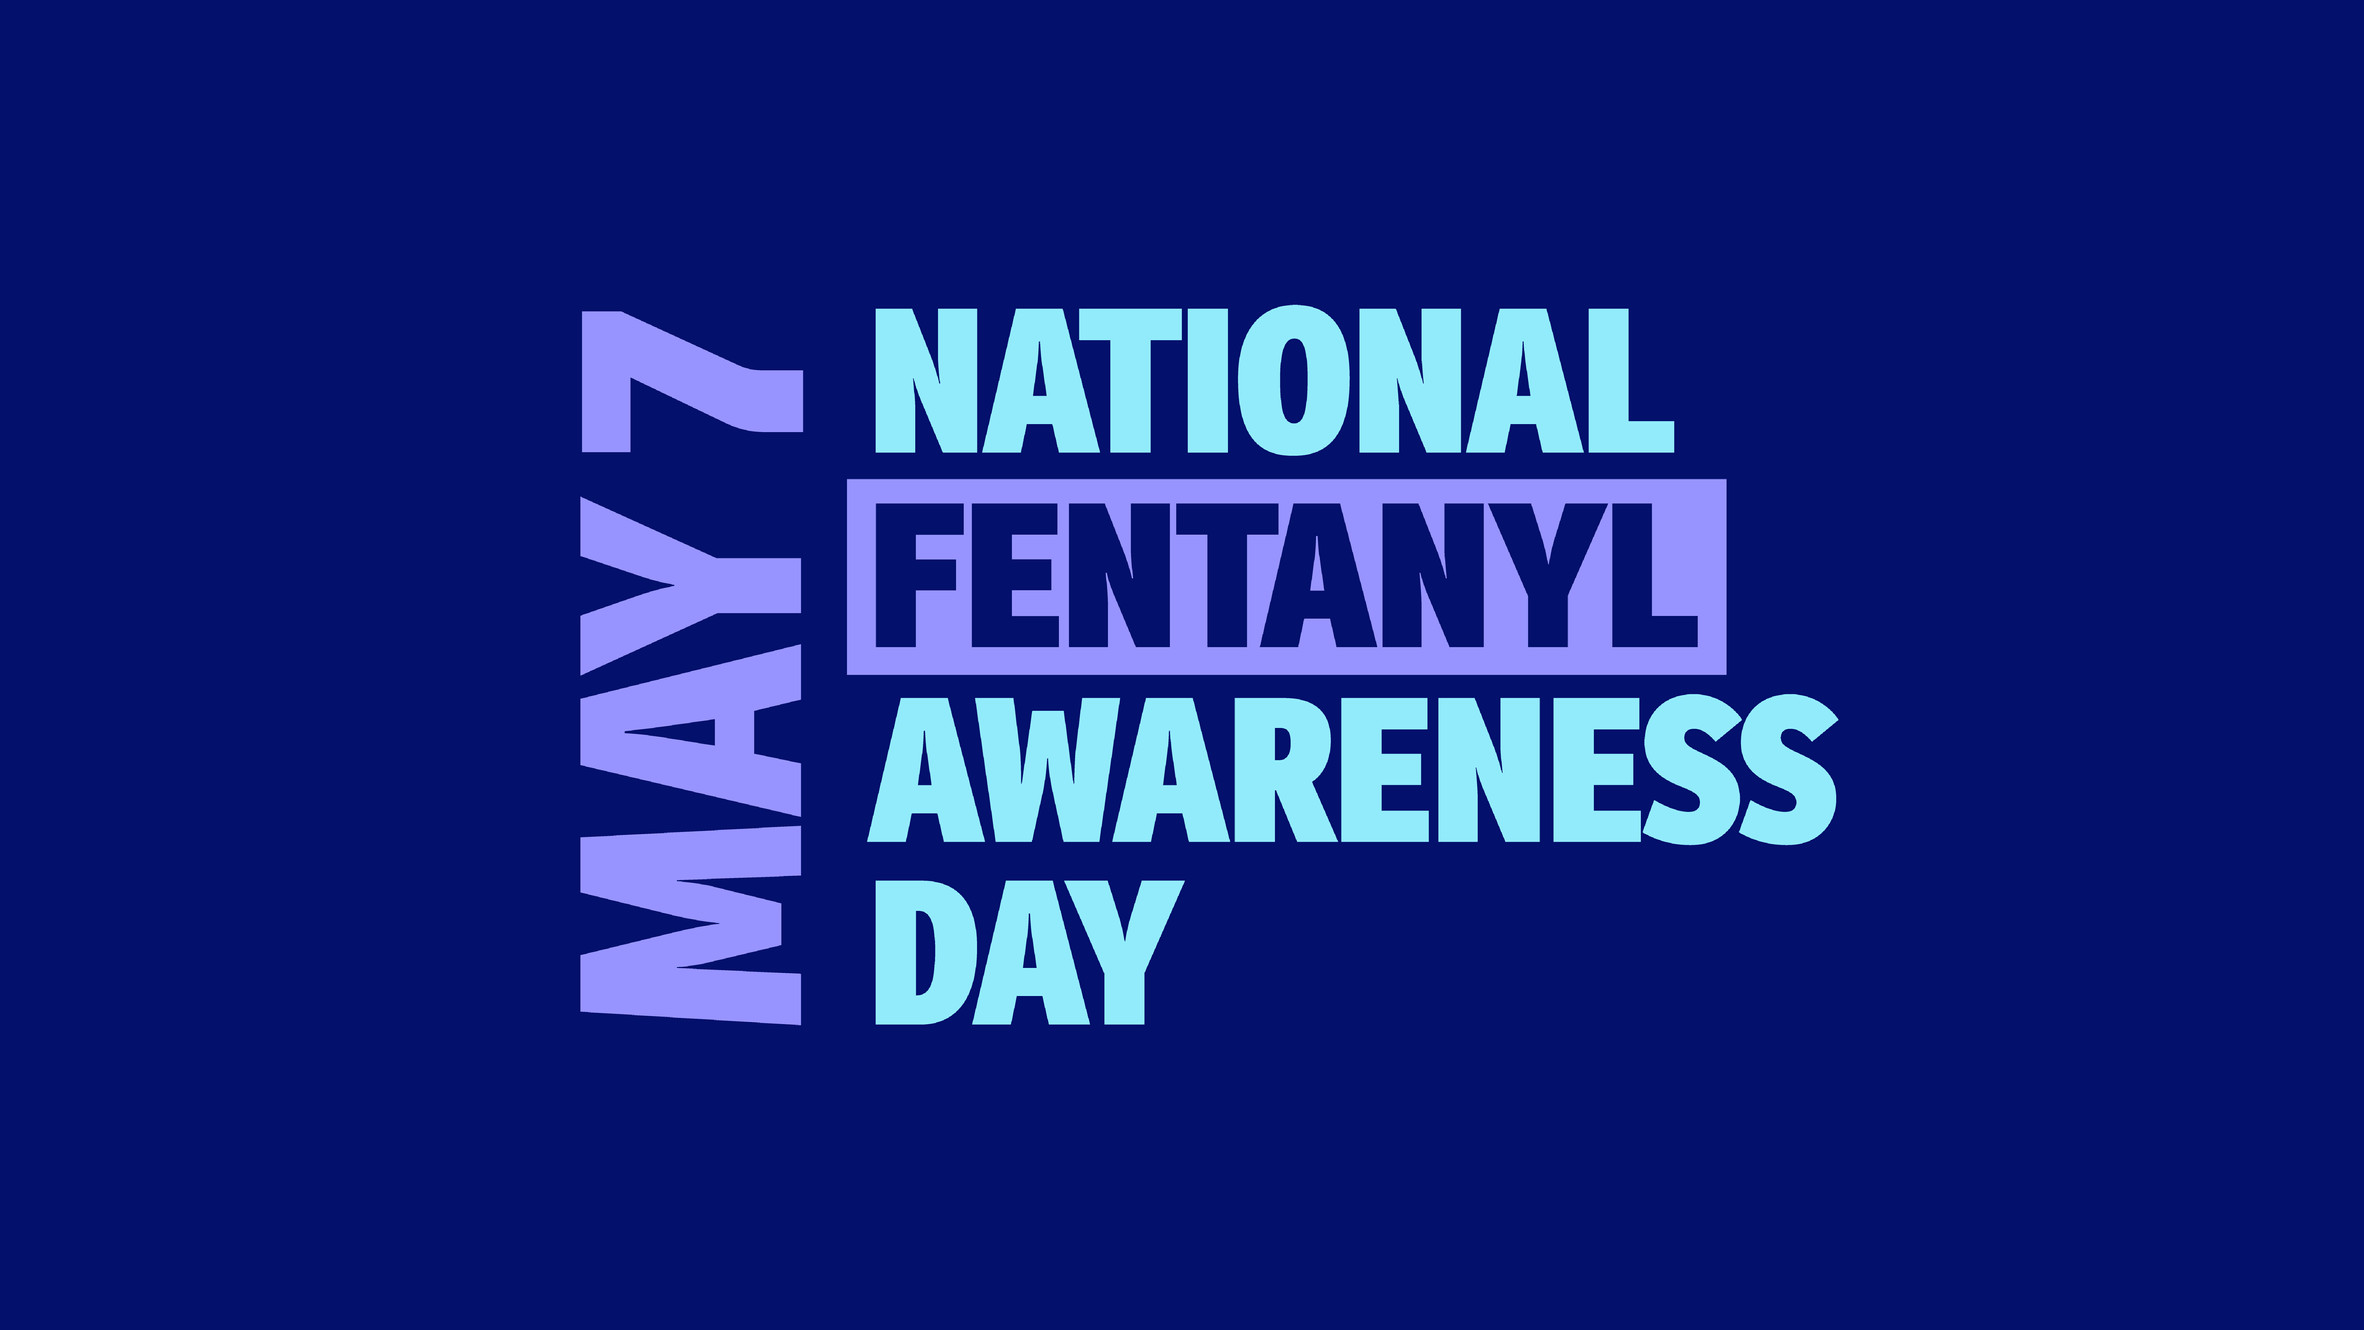 Protect yourself and your friends by learning the facts.  Learn more about dangers of fentanyl.